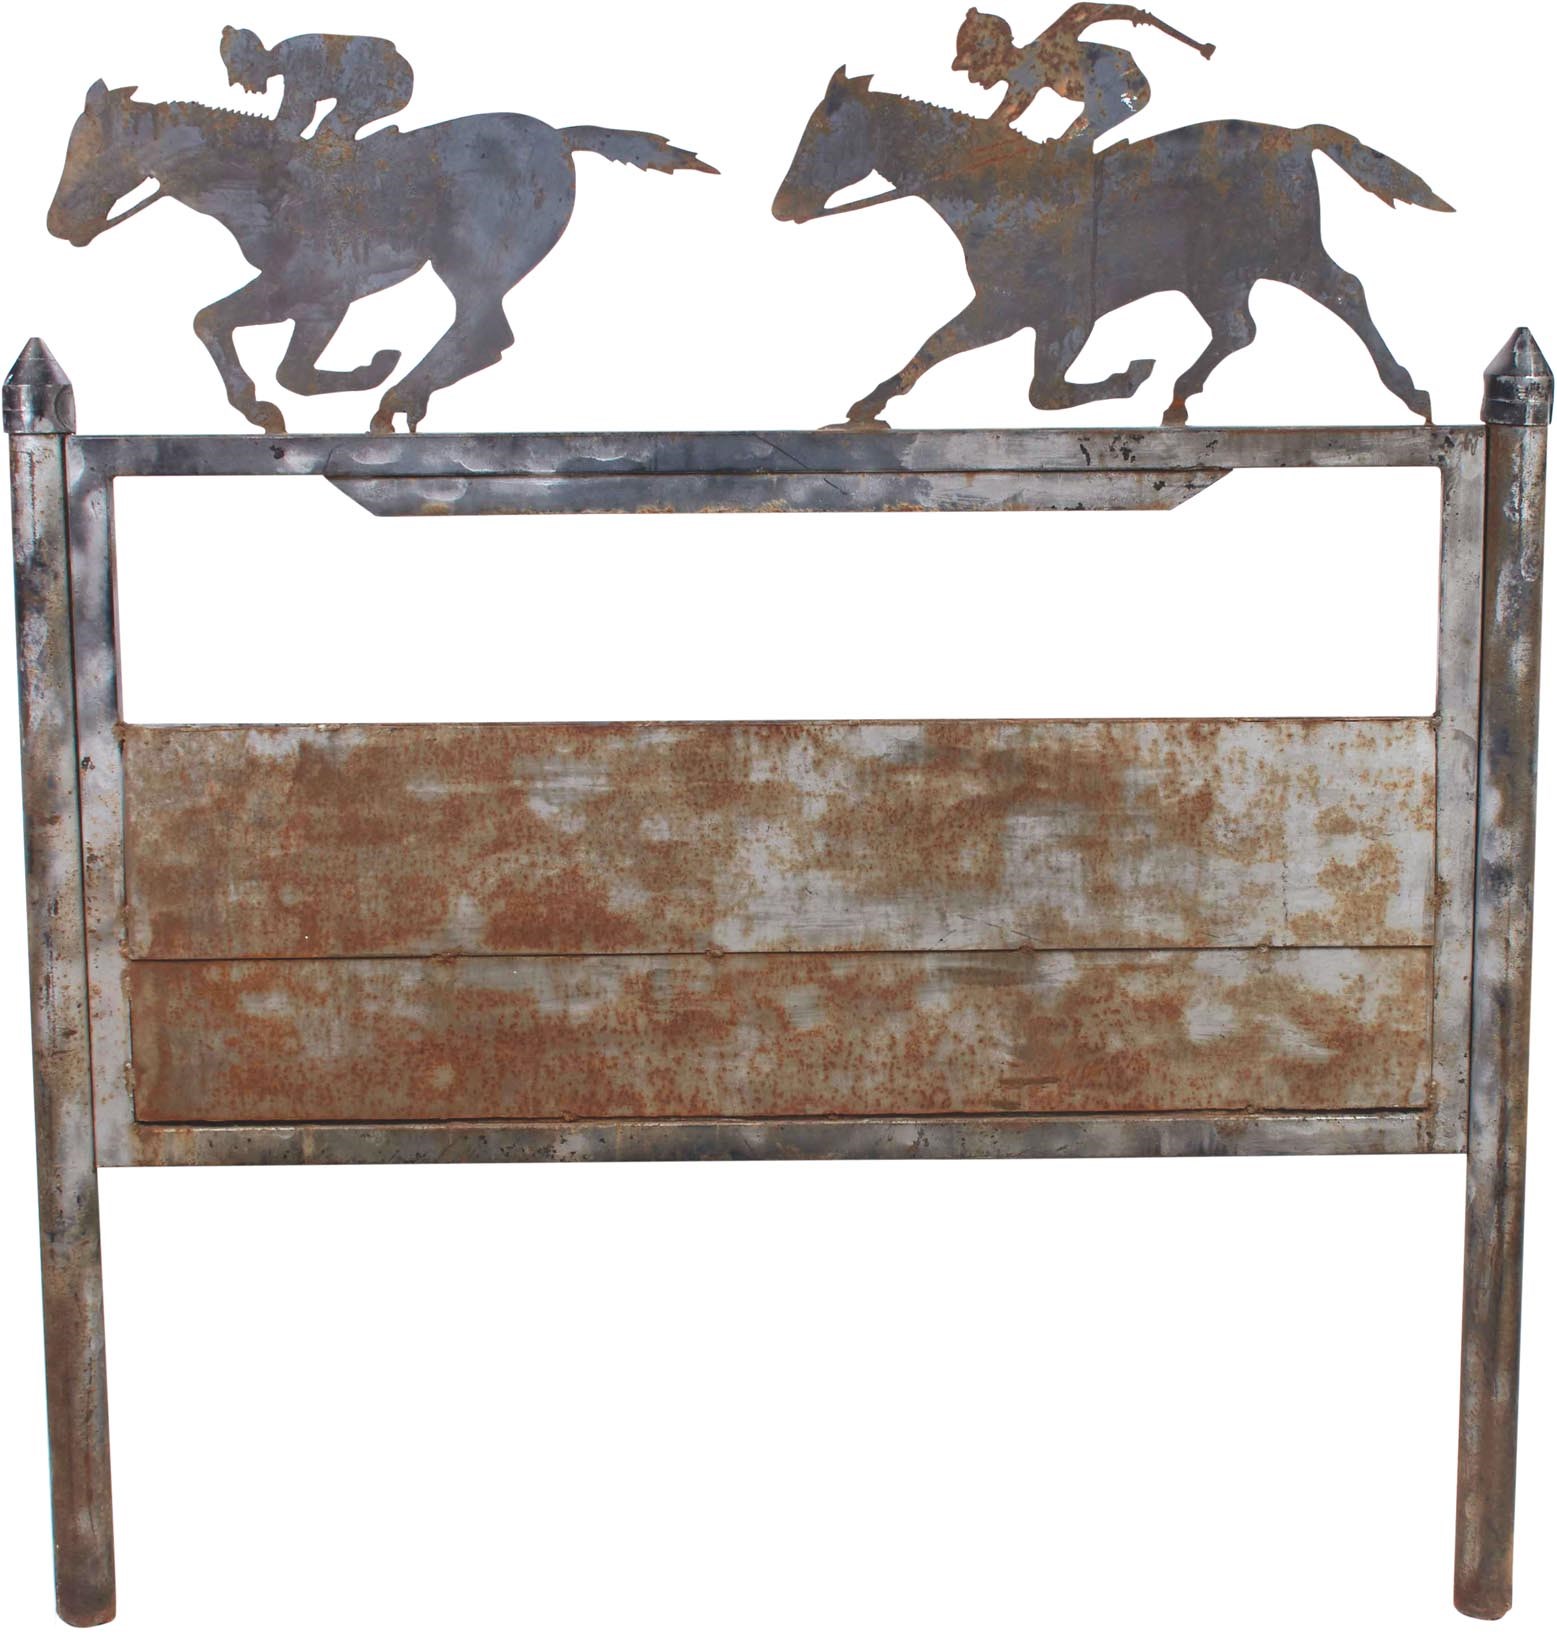 Horse Racing - Exceptional 1930s Horse Racing Stable Cast Iron Trade Sign